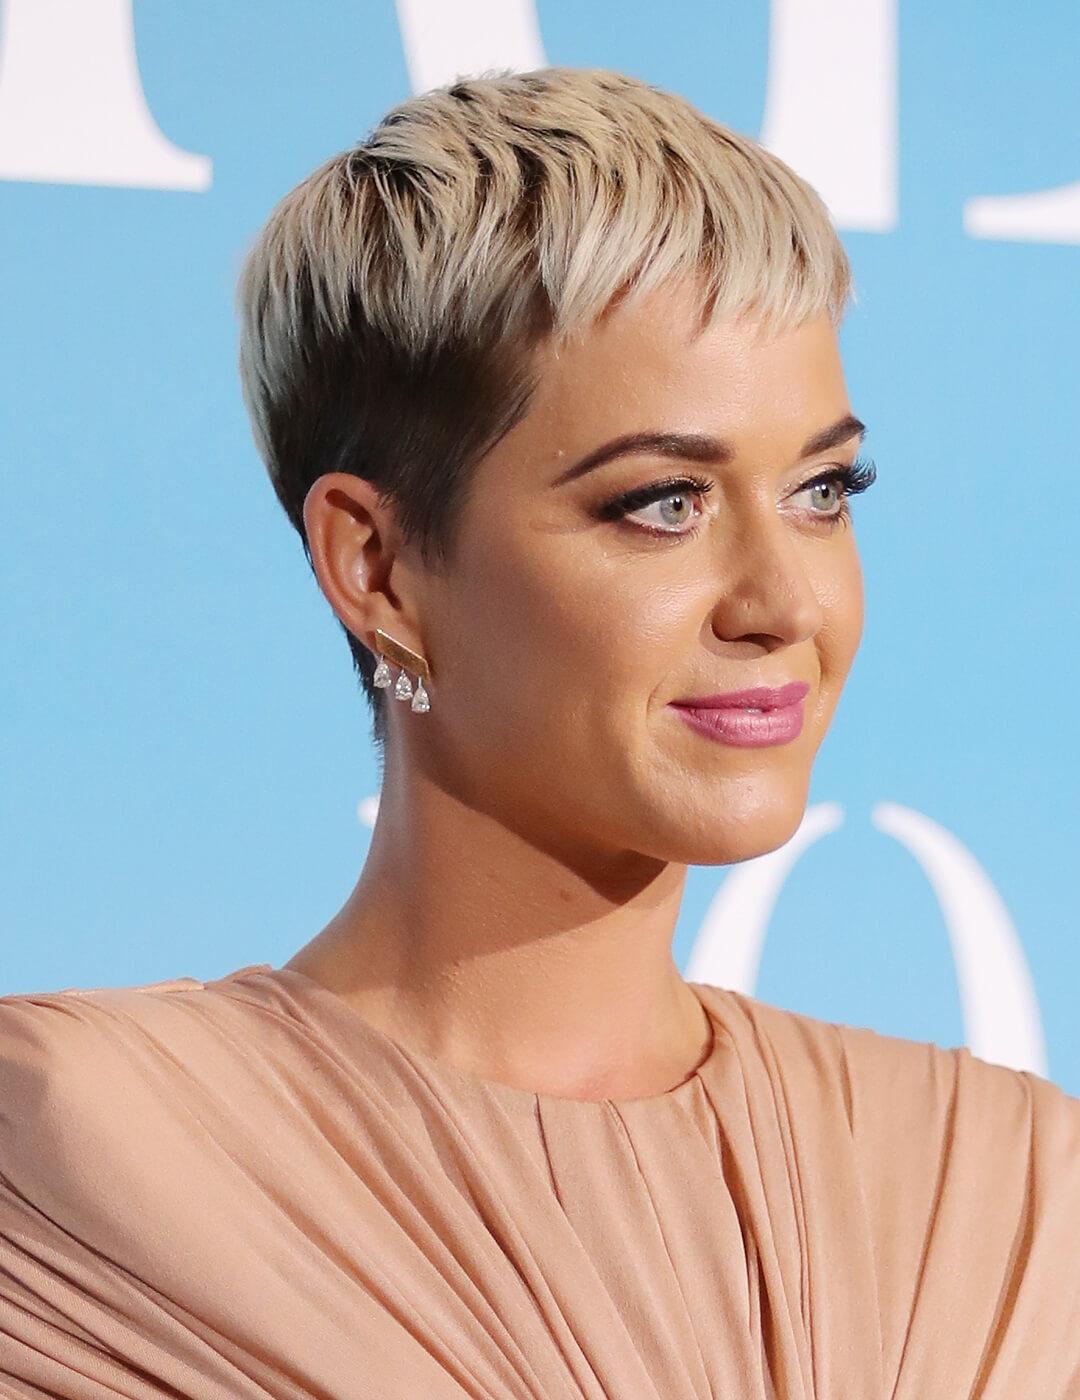 Katy Perry rocking a nude dress and pixie cut hairstyle